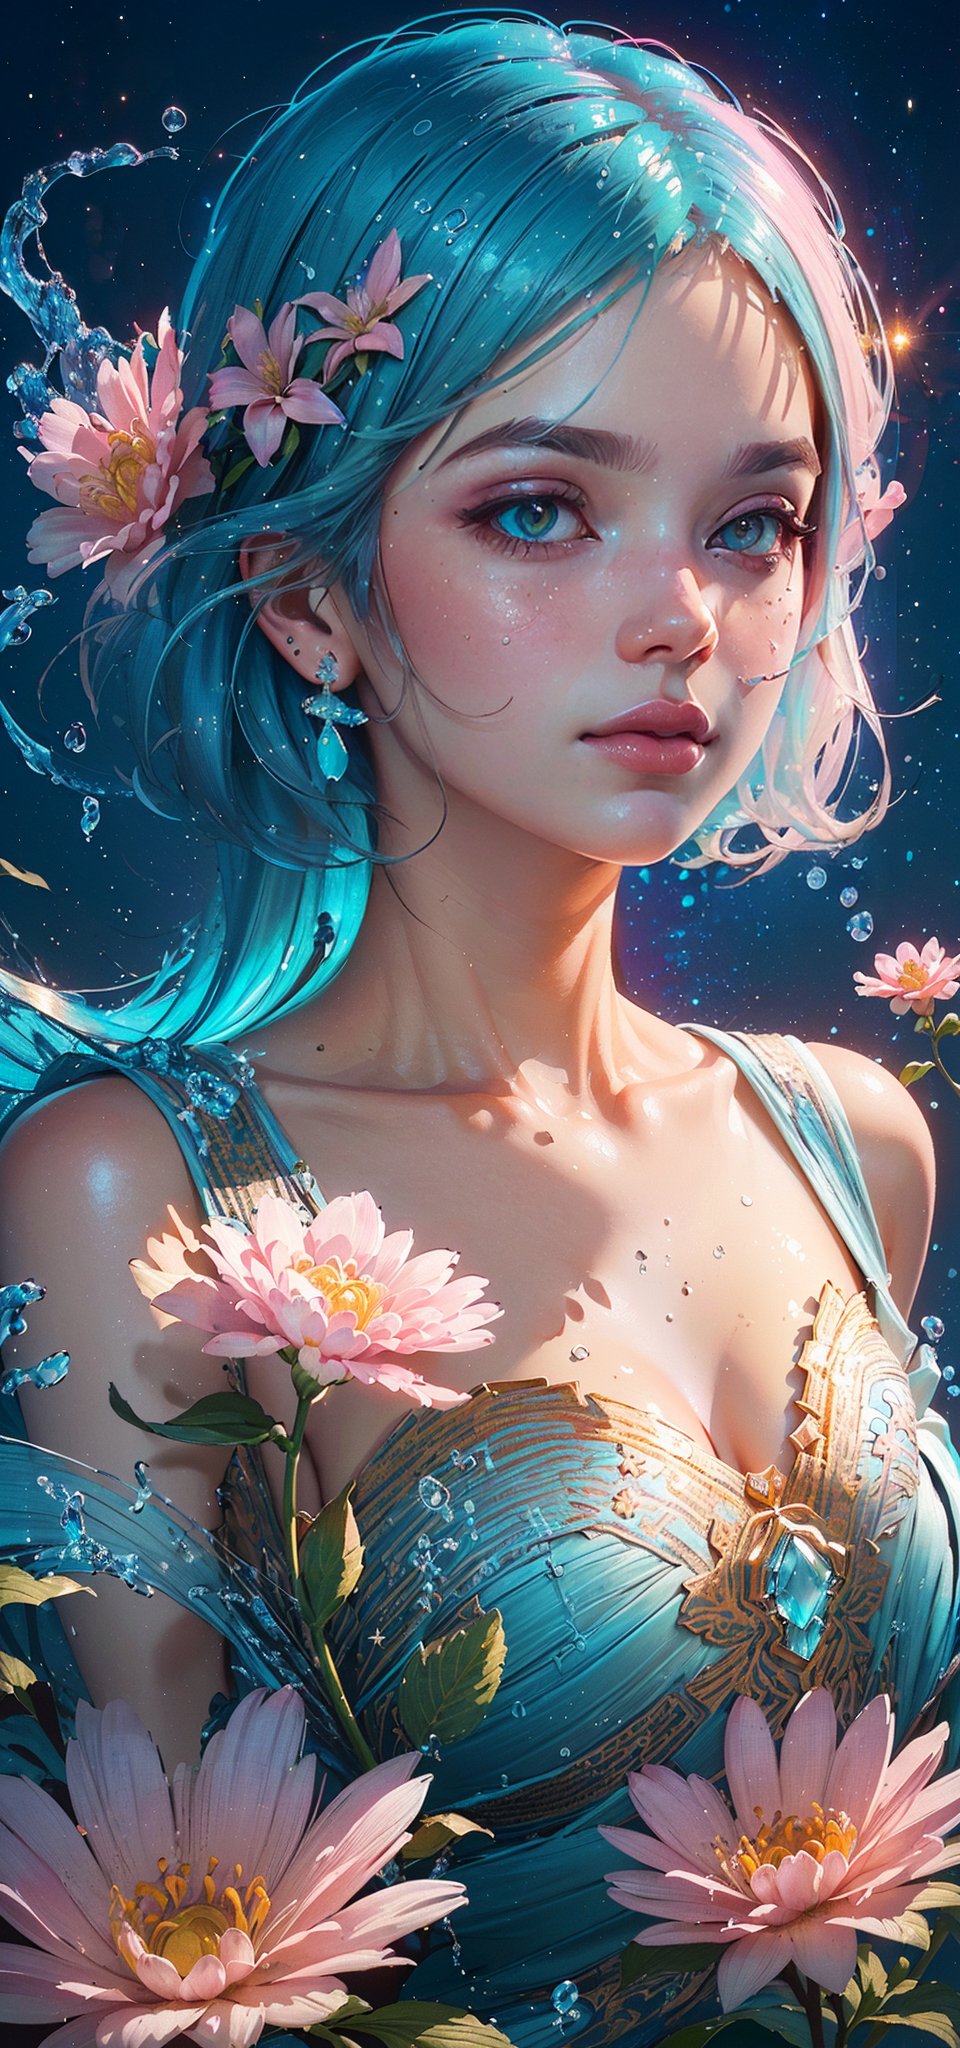 Breathtaking, (Masterpiece, Best Quality:1.2), (a natural beauty), 1 girl, solo, in a serene mood, High quality digital art, (with realistic textures), (Ilya Kuvshinov style:1.3), (aquamarine hair:1.3), (pink flower accents:1.3), with a tranquil expression , in elegant attire, (sunny garden backdrop:1.2), (dynamic angle:1.2), (Kuvshinov-inspired blend:1.3), realistic details, captivating aura, serene composition, (cosmic hues, cosmic tapestry, cosmic fusion:1.3), (ethereal allure:1.3, ethereal lighting:1.3),professional, highly detailed,